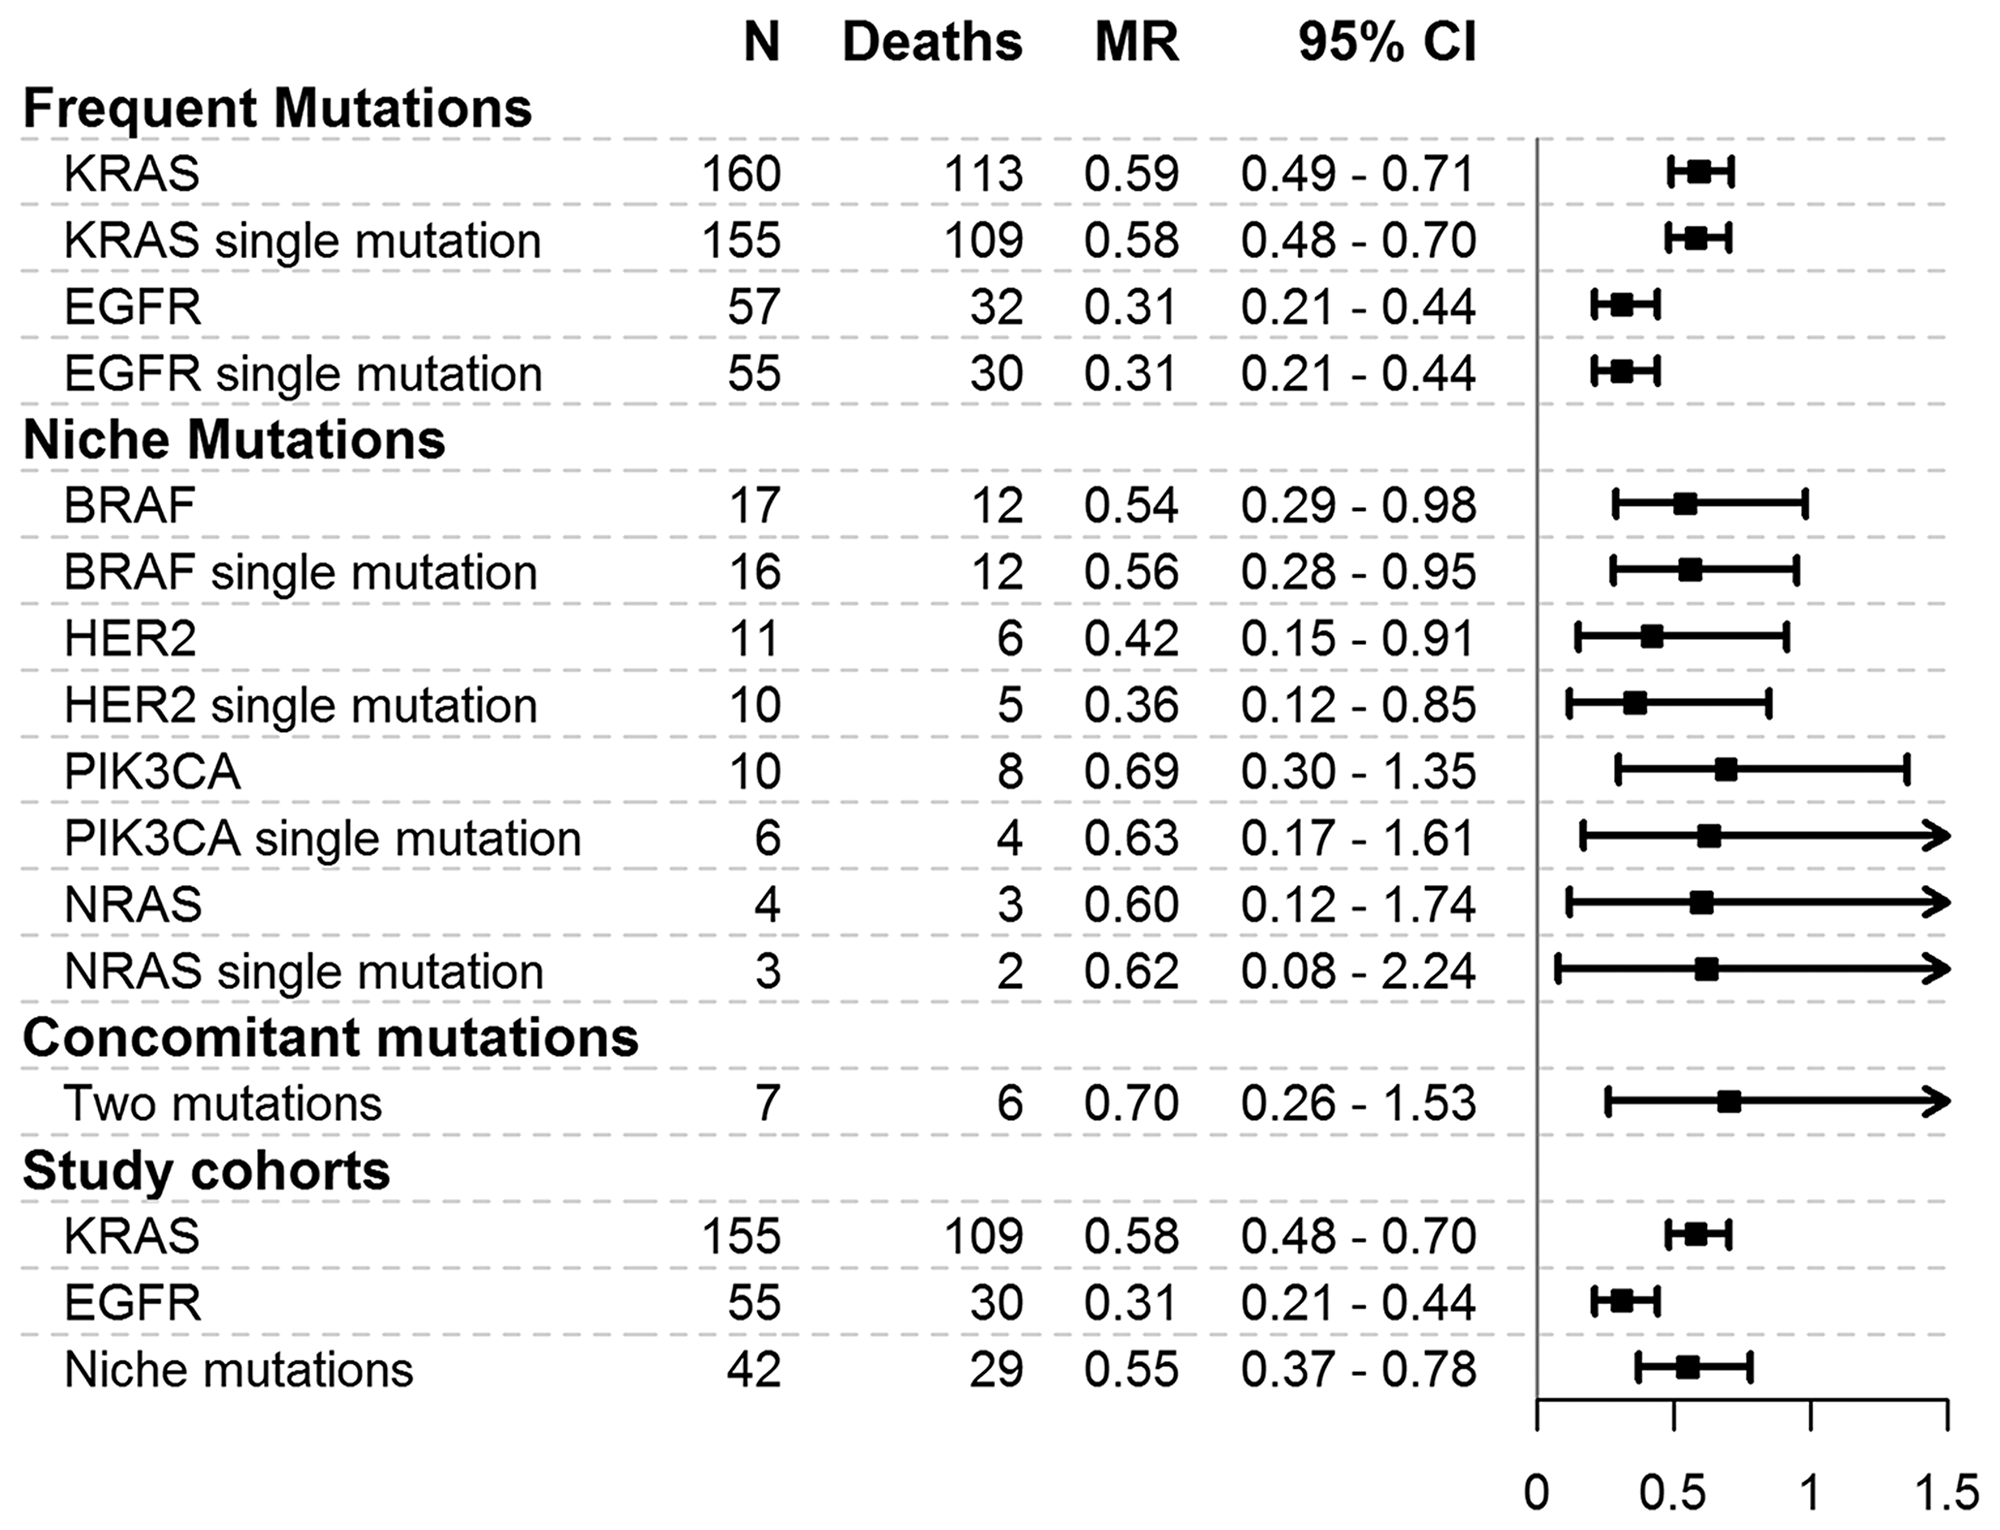 Mortality rates for mutations and cohorts considered in the study.